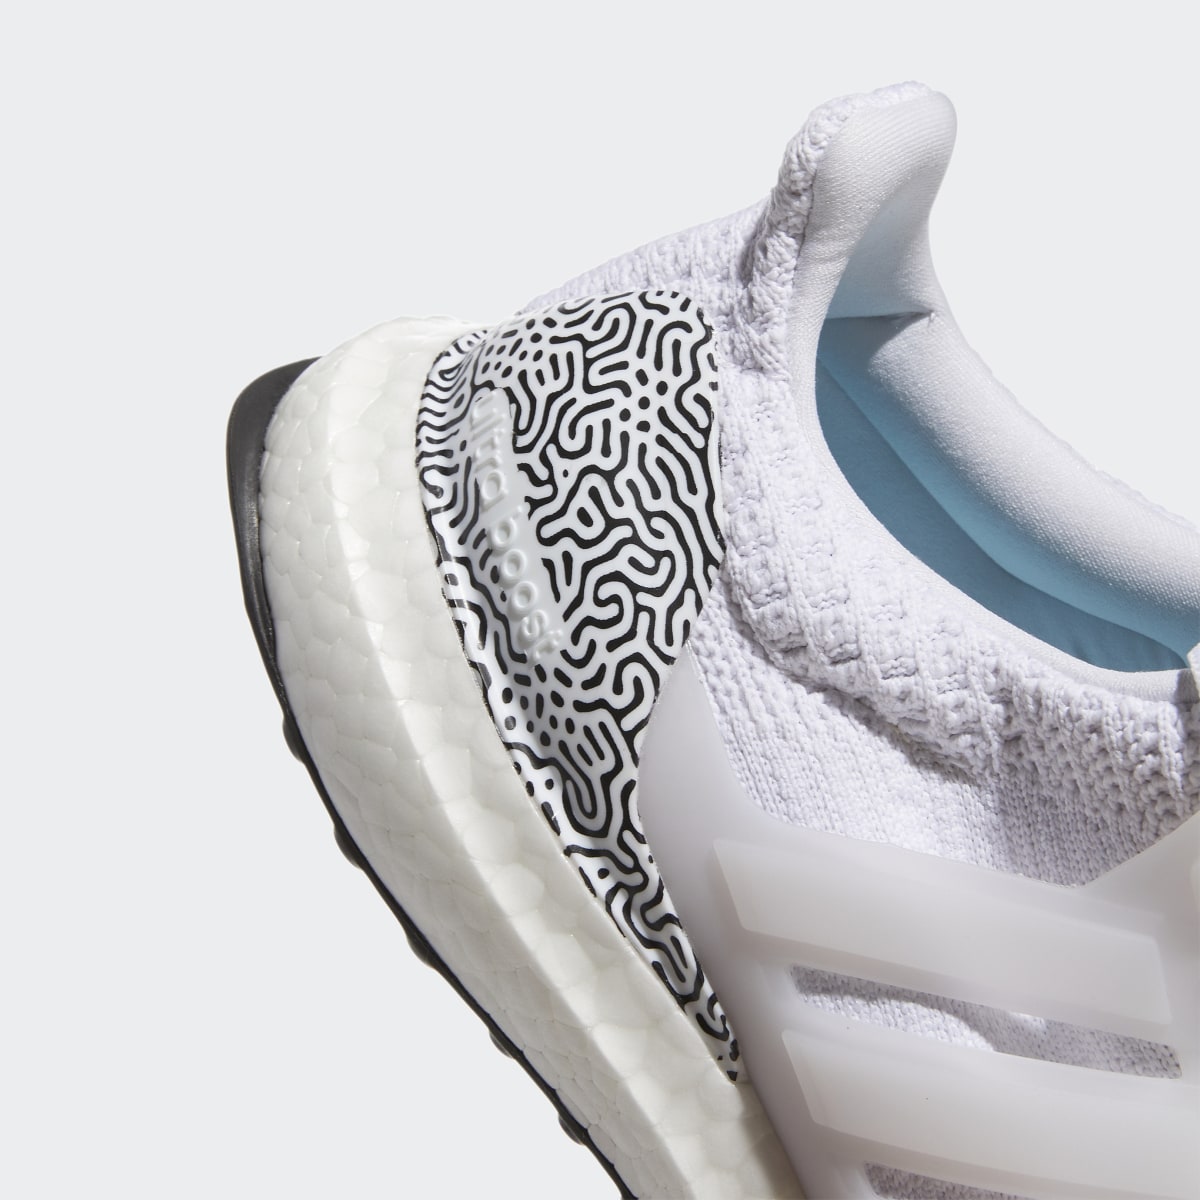 Adidas ULTRABOOST DNA SHOES. 12